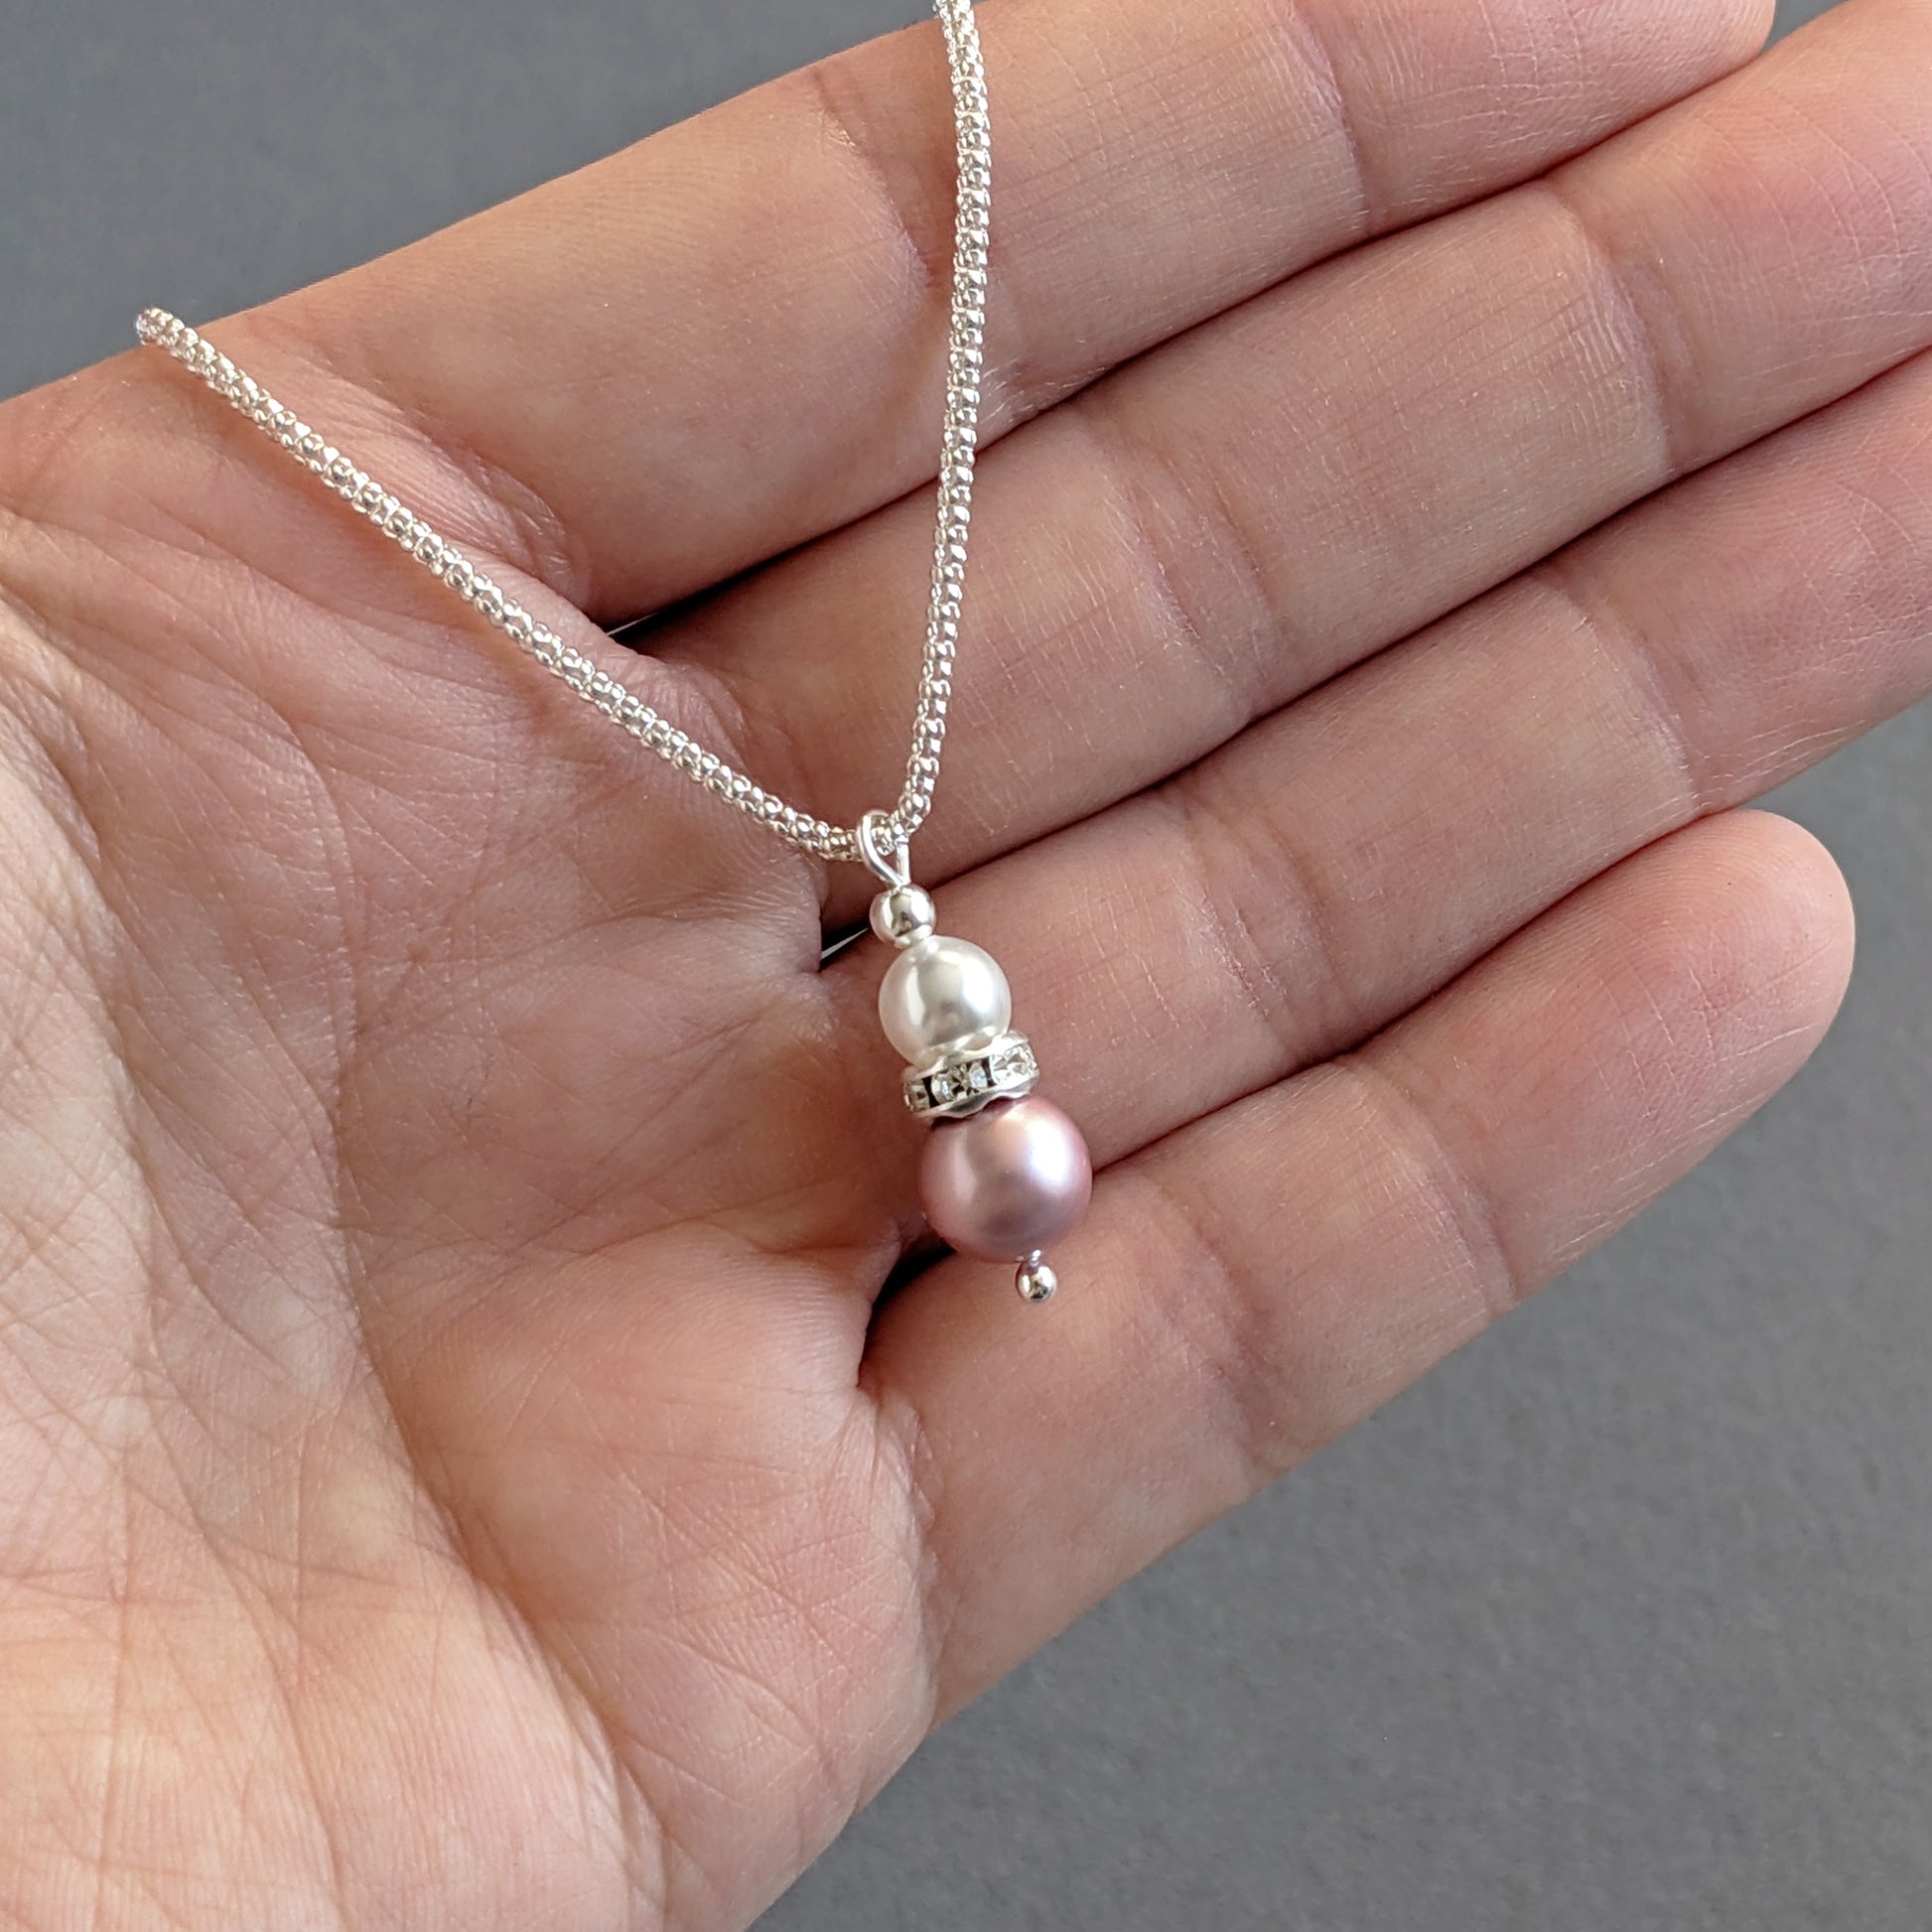 Dusty pink pearl pendant necklaces